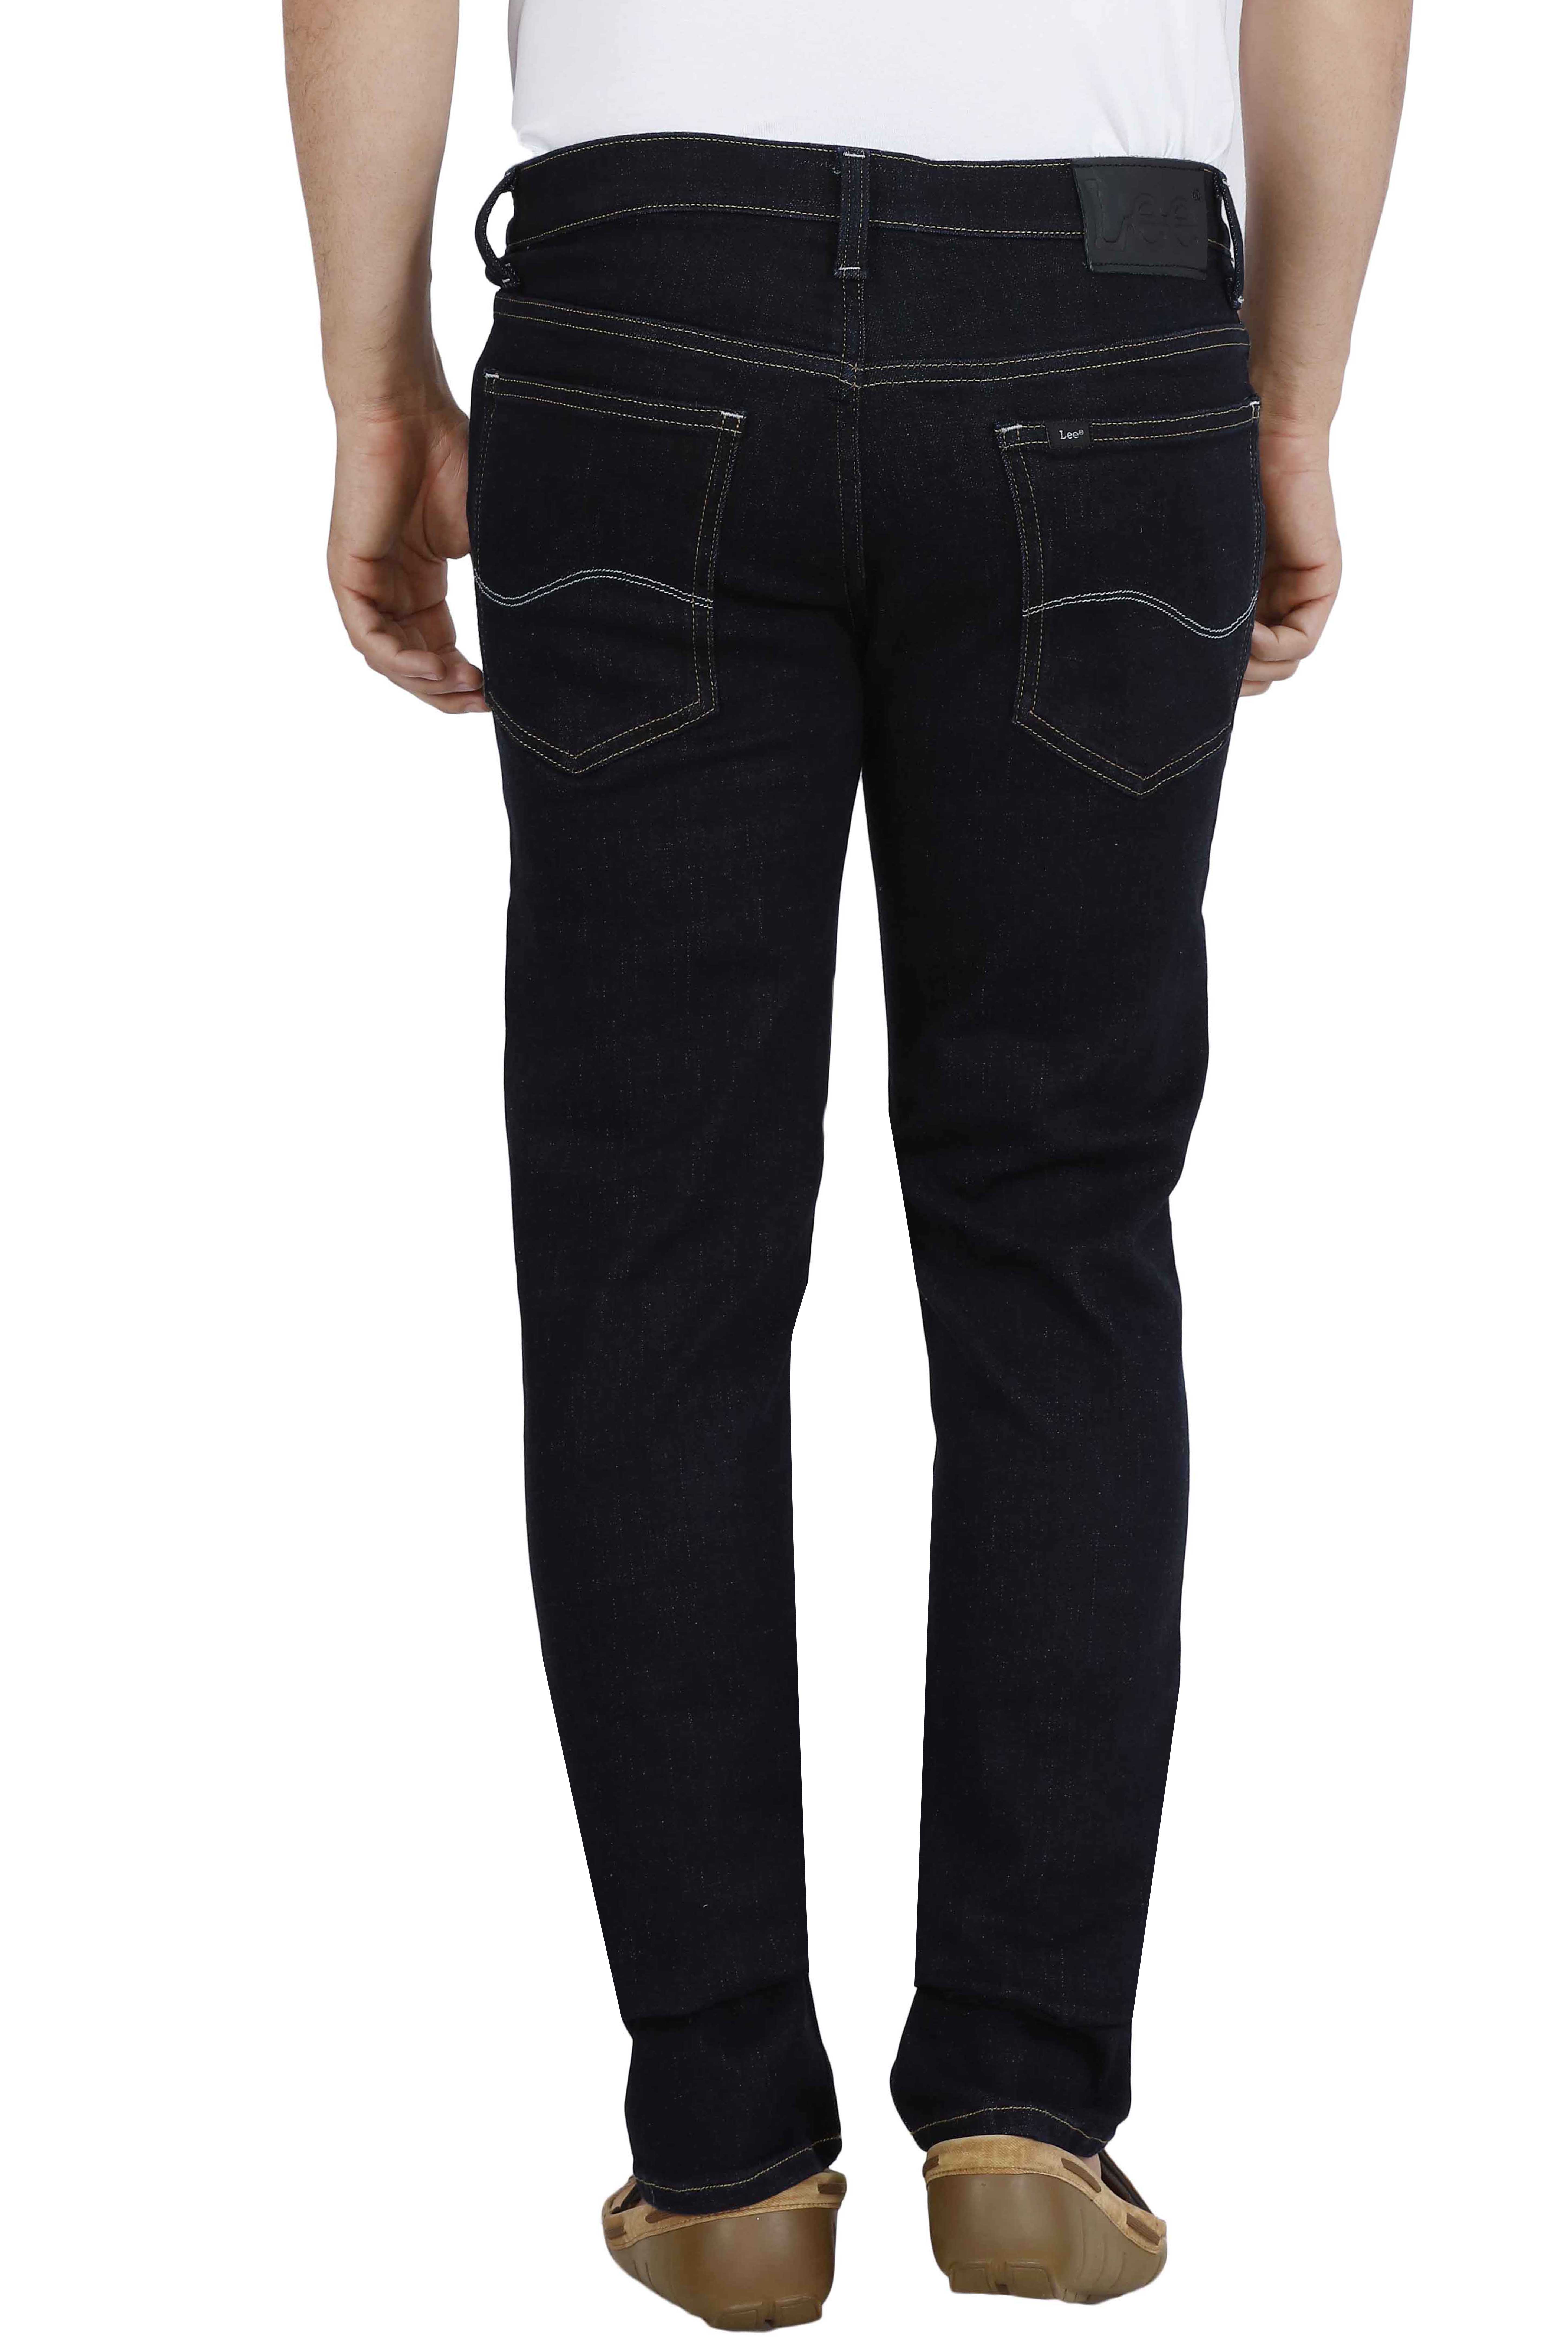 Buy Lee Blue Skinny Fit Jeans For Men Online @ ₹1799 from ShopClues